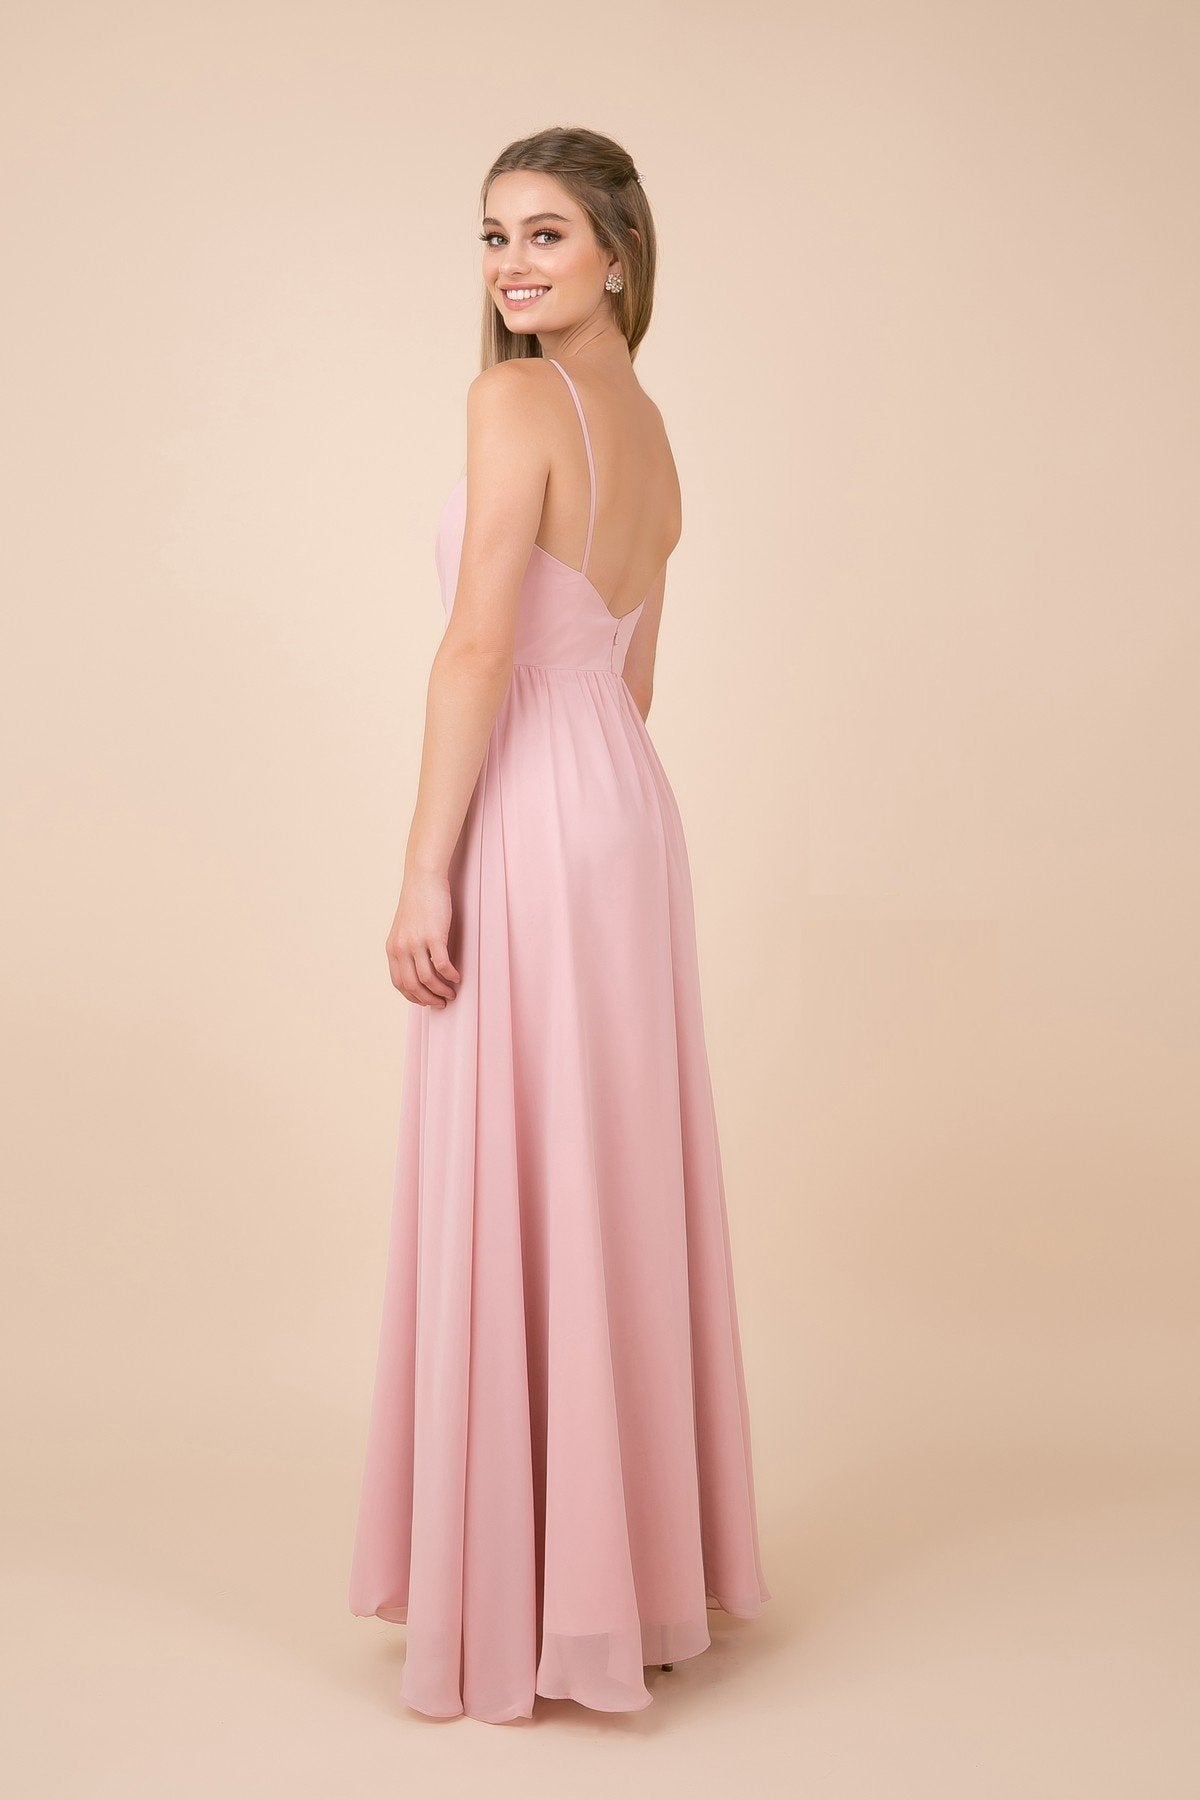 Nox Anabel - R275SC Plunging Surplice V-neck A-line Gown